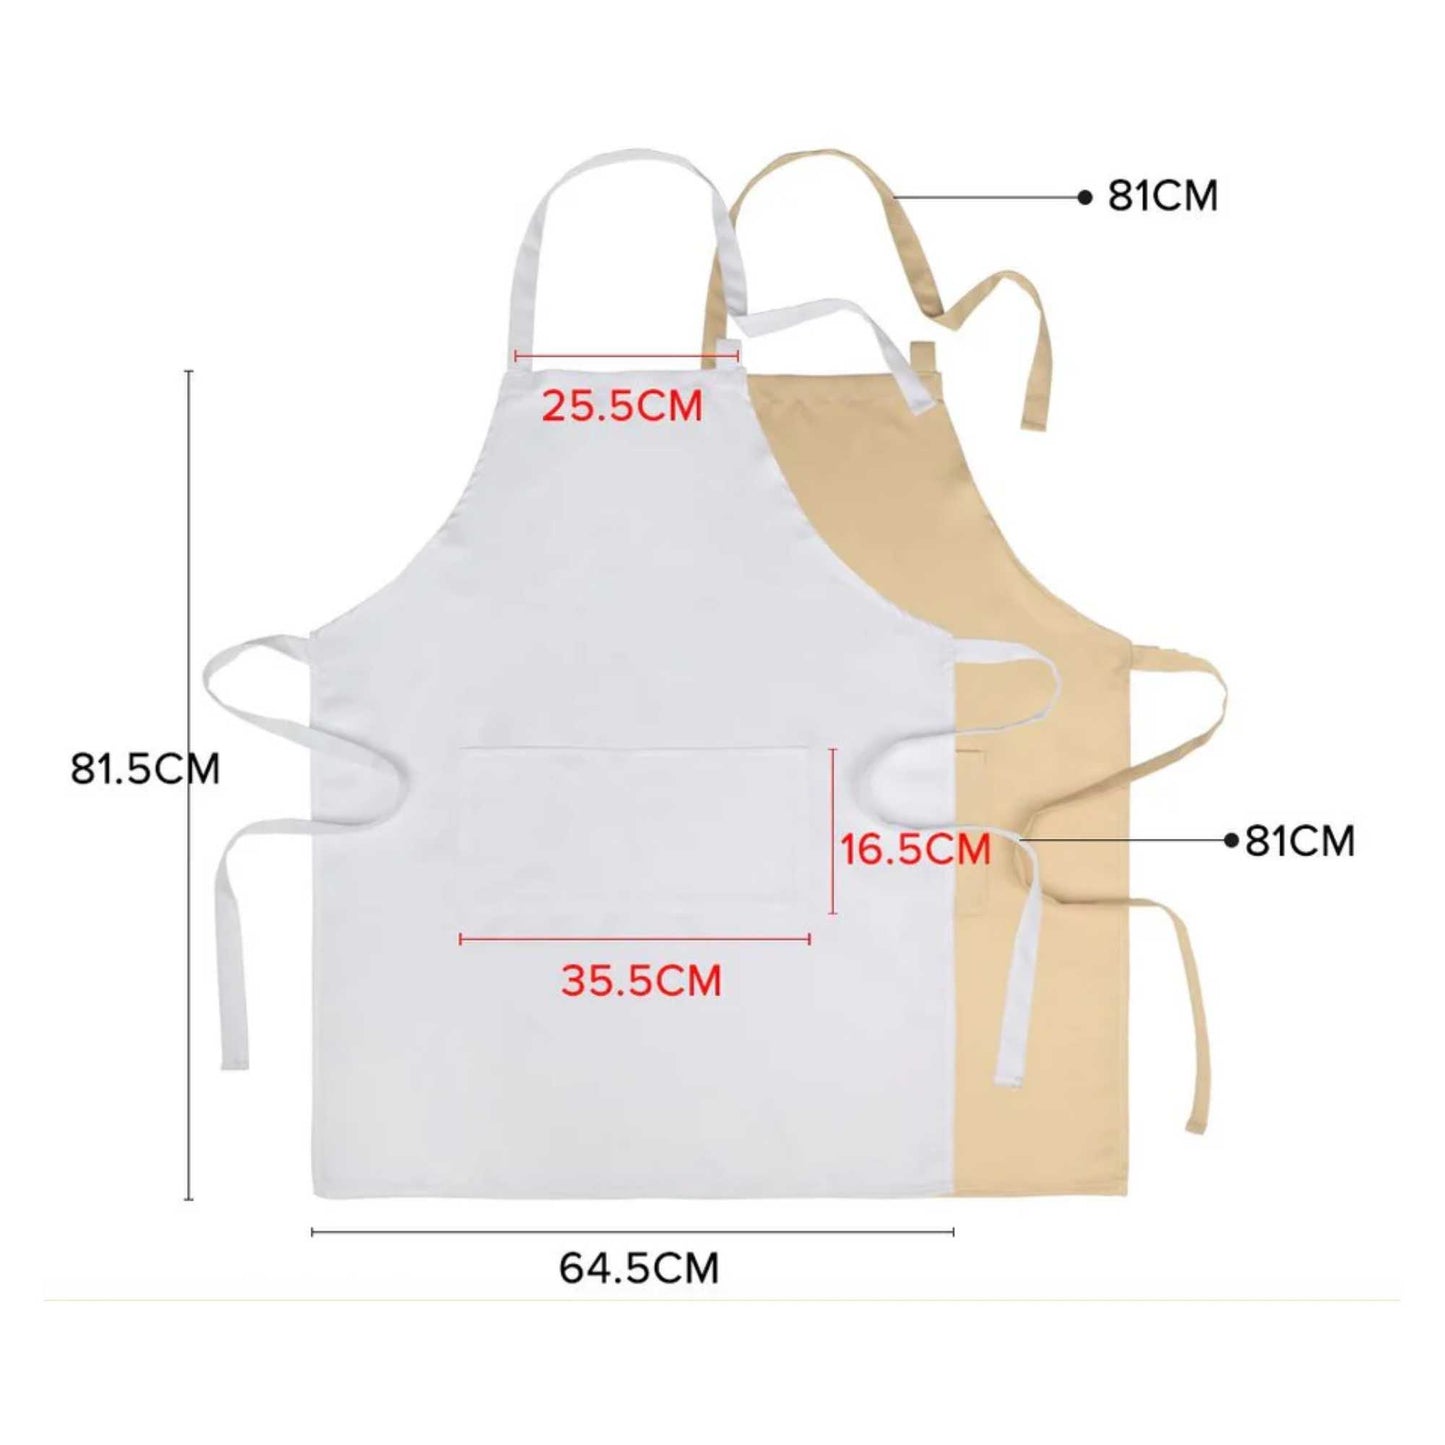 Personalised Polyester Apron: Ideal for Cooking, Art, Schools, and More